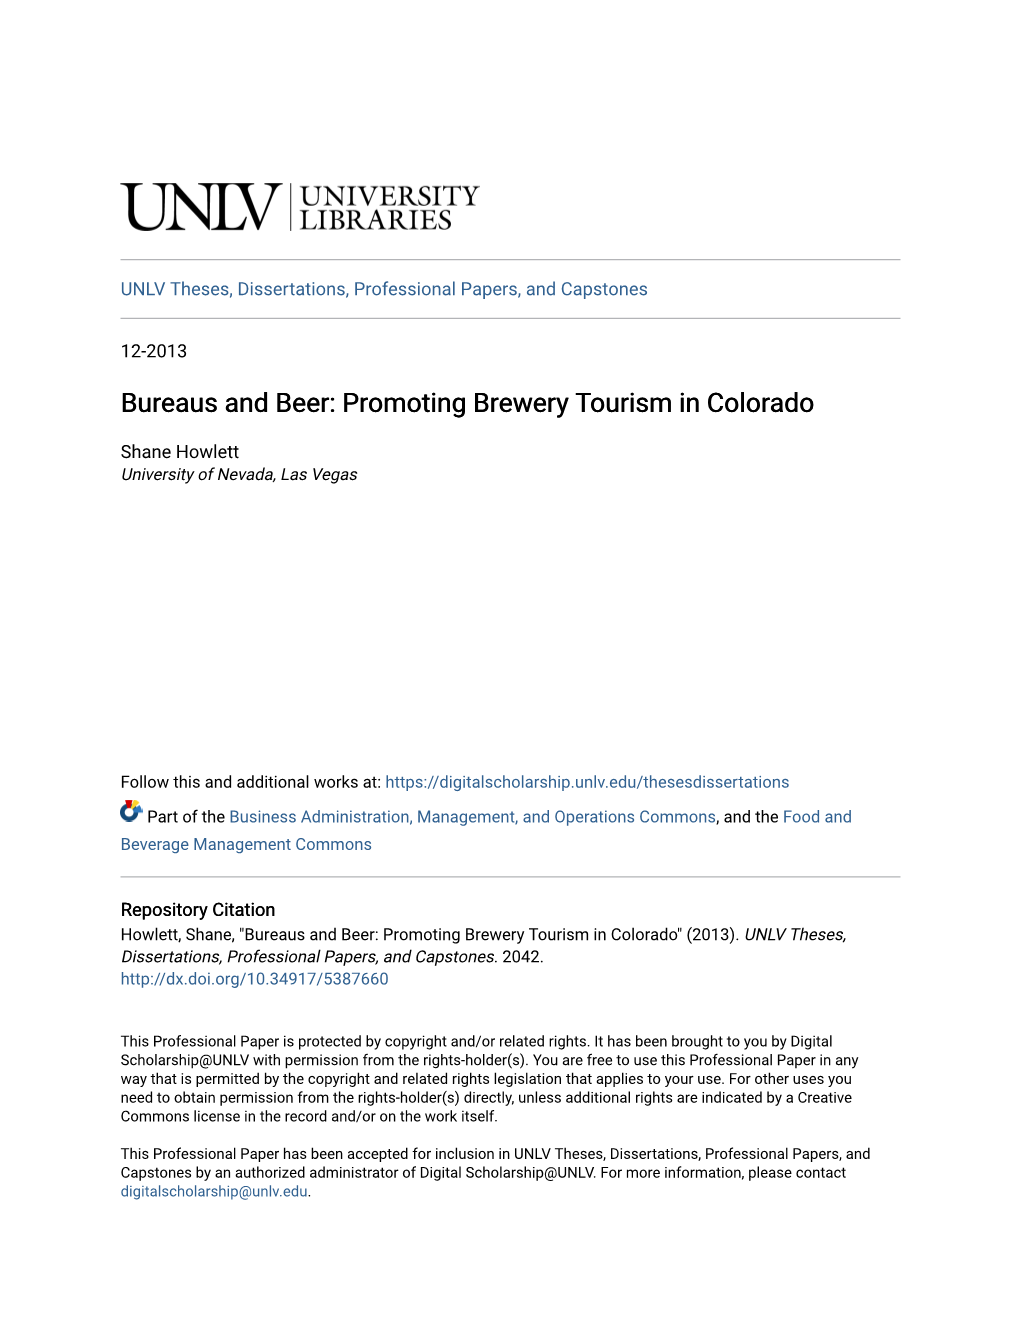 Bureaus and Beer: Promoting Brewery Tourism in Colorado